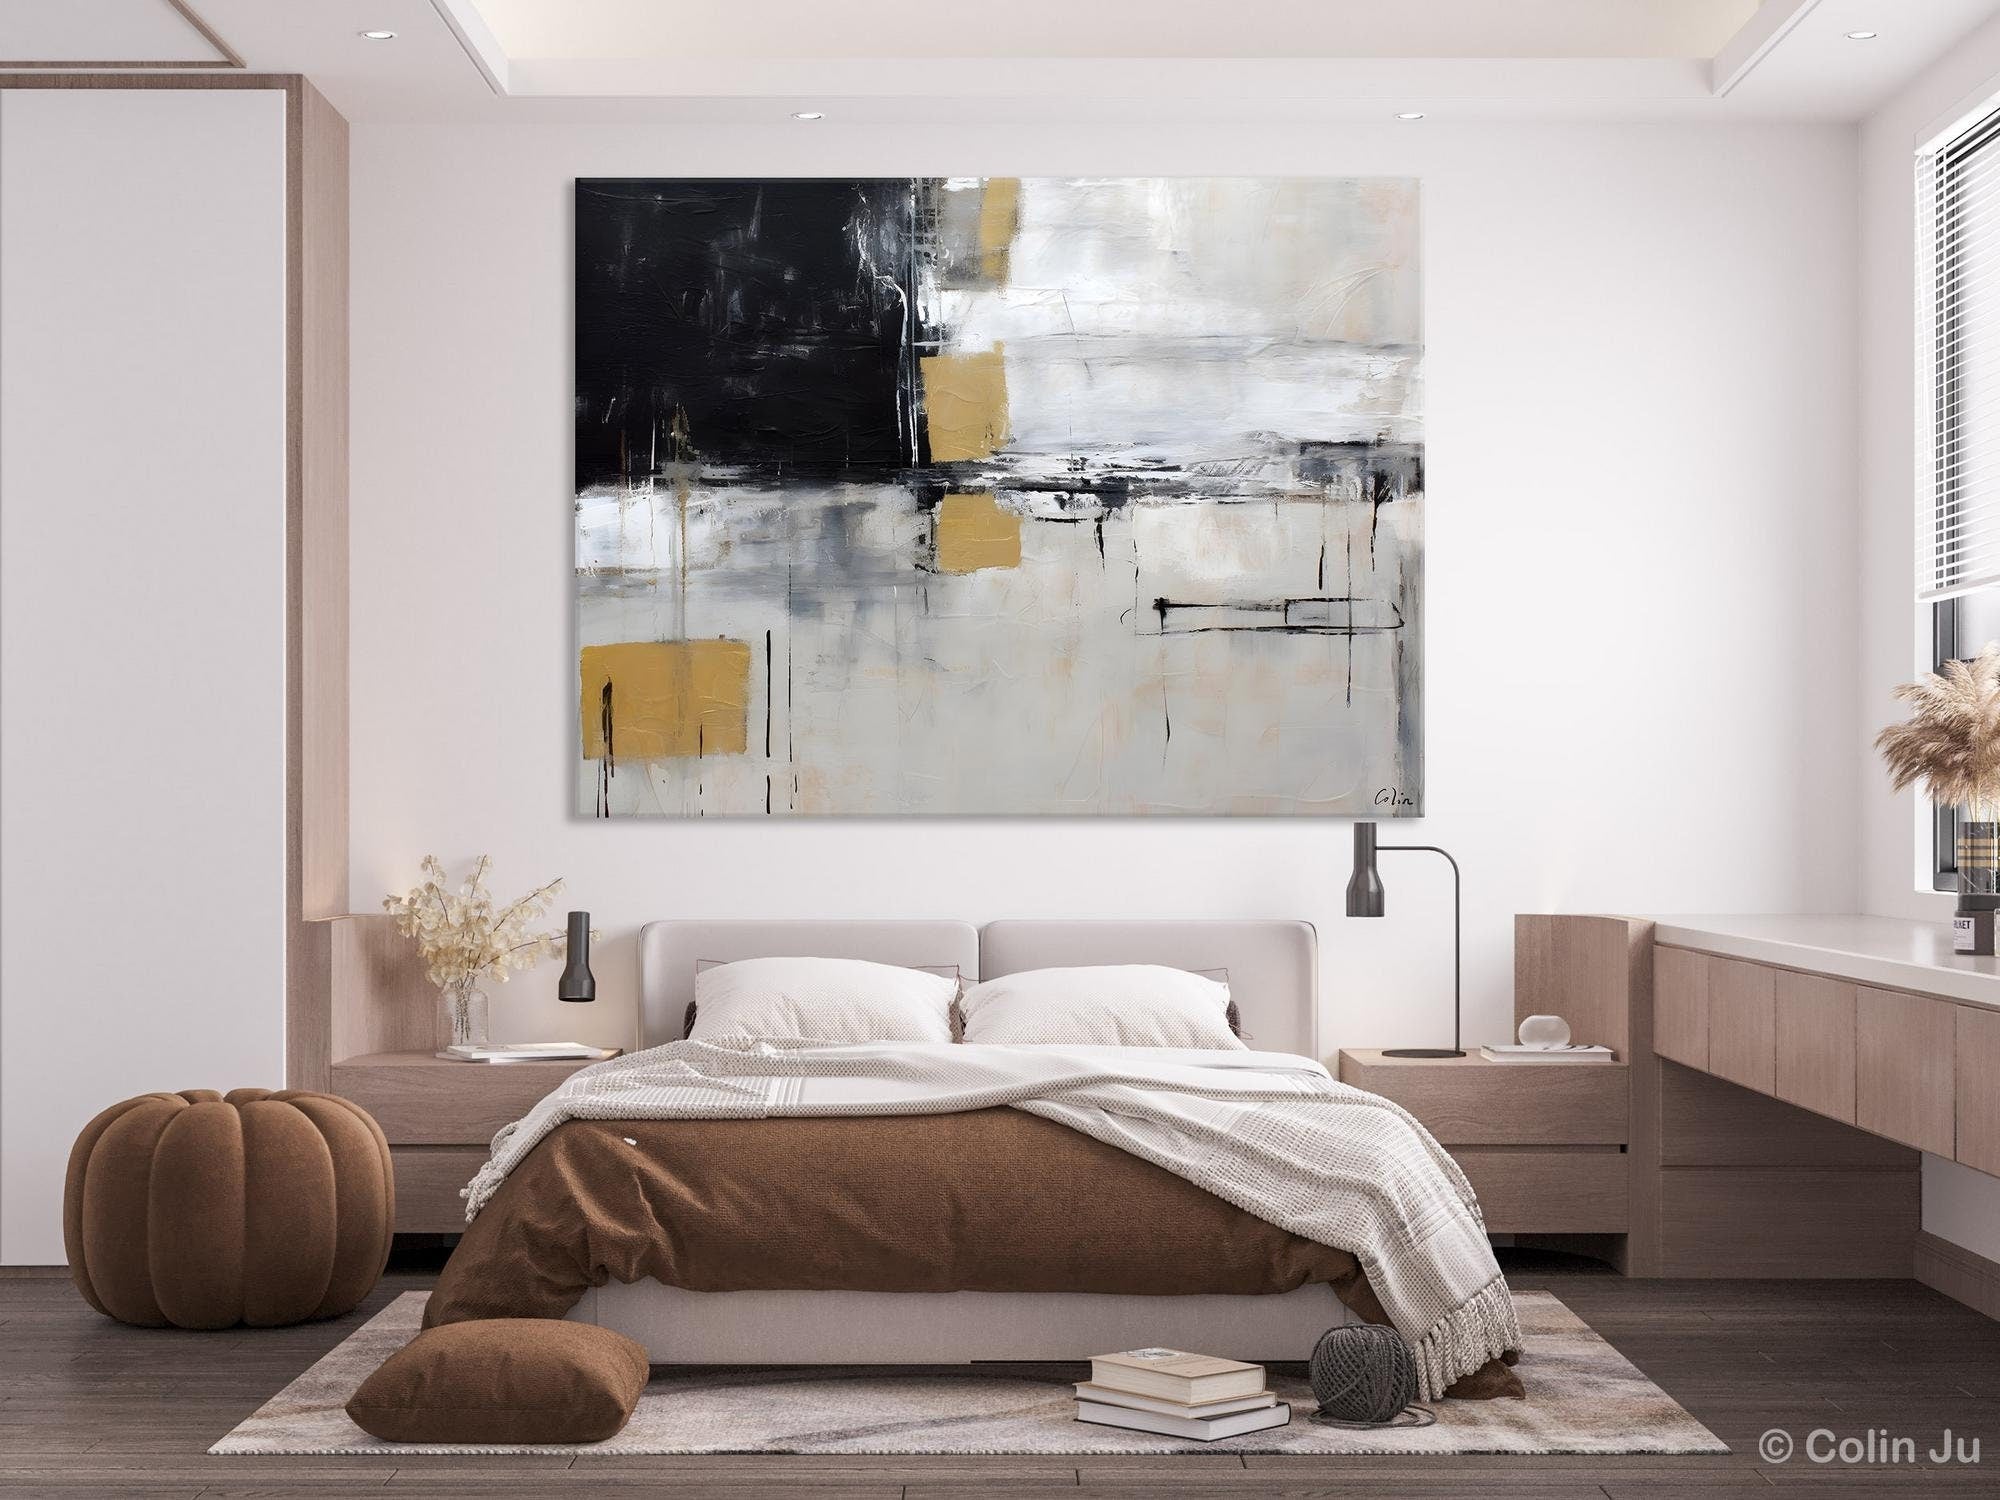 Original Abstract Art, Modern Wall Art Ideas for Bedroom, Extra Large Canvas Paintings, Impasto Art Painting, Contemporary Acrylic Paintings-Grace Painting Crafts